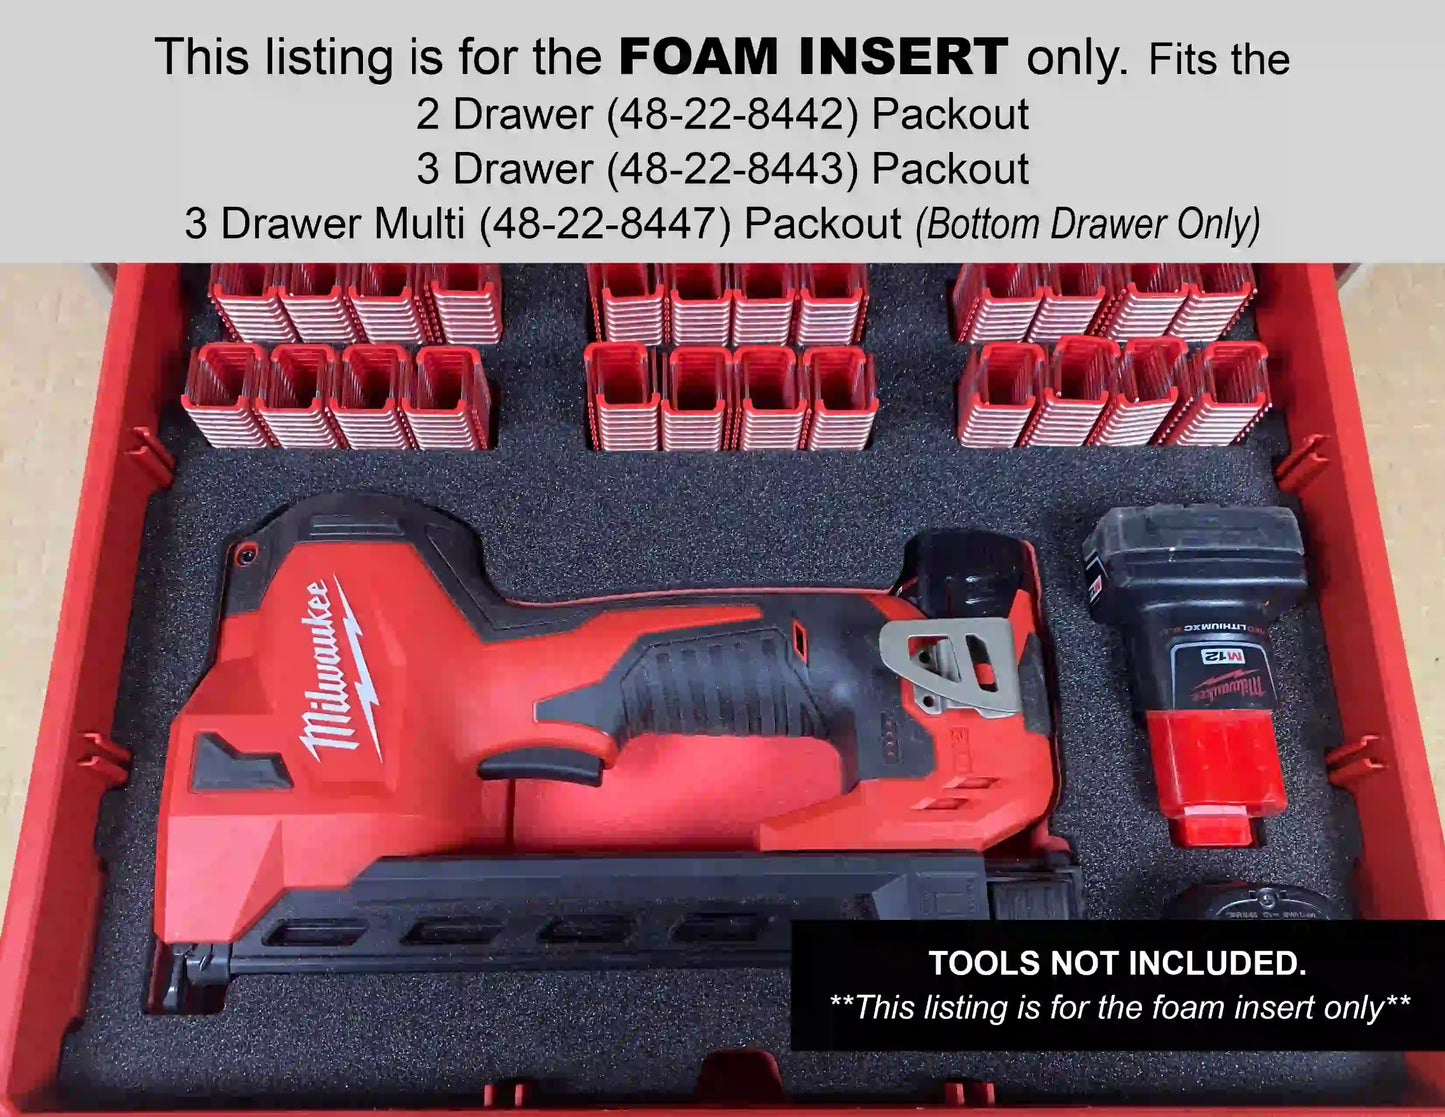 FOAM INSERT to store M12 Cable Stapler 2448-20 in a Milwaukee Packout 3 Drawer Tool Box - Tools NOT Included